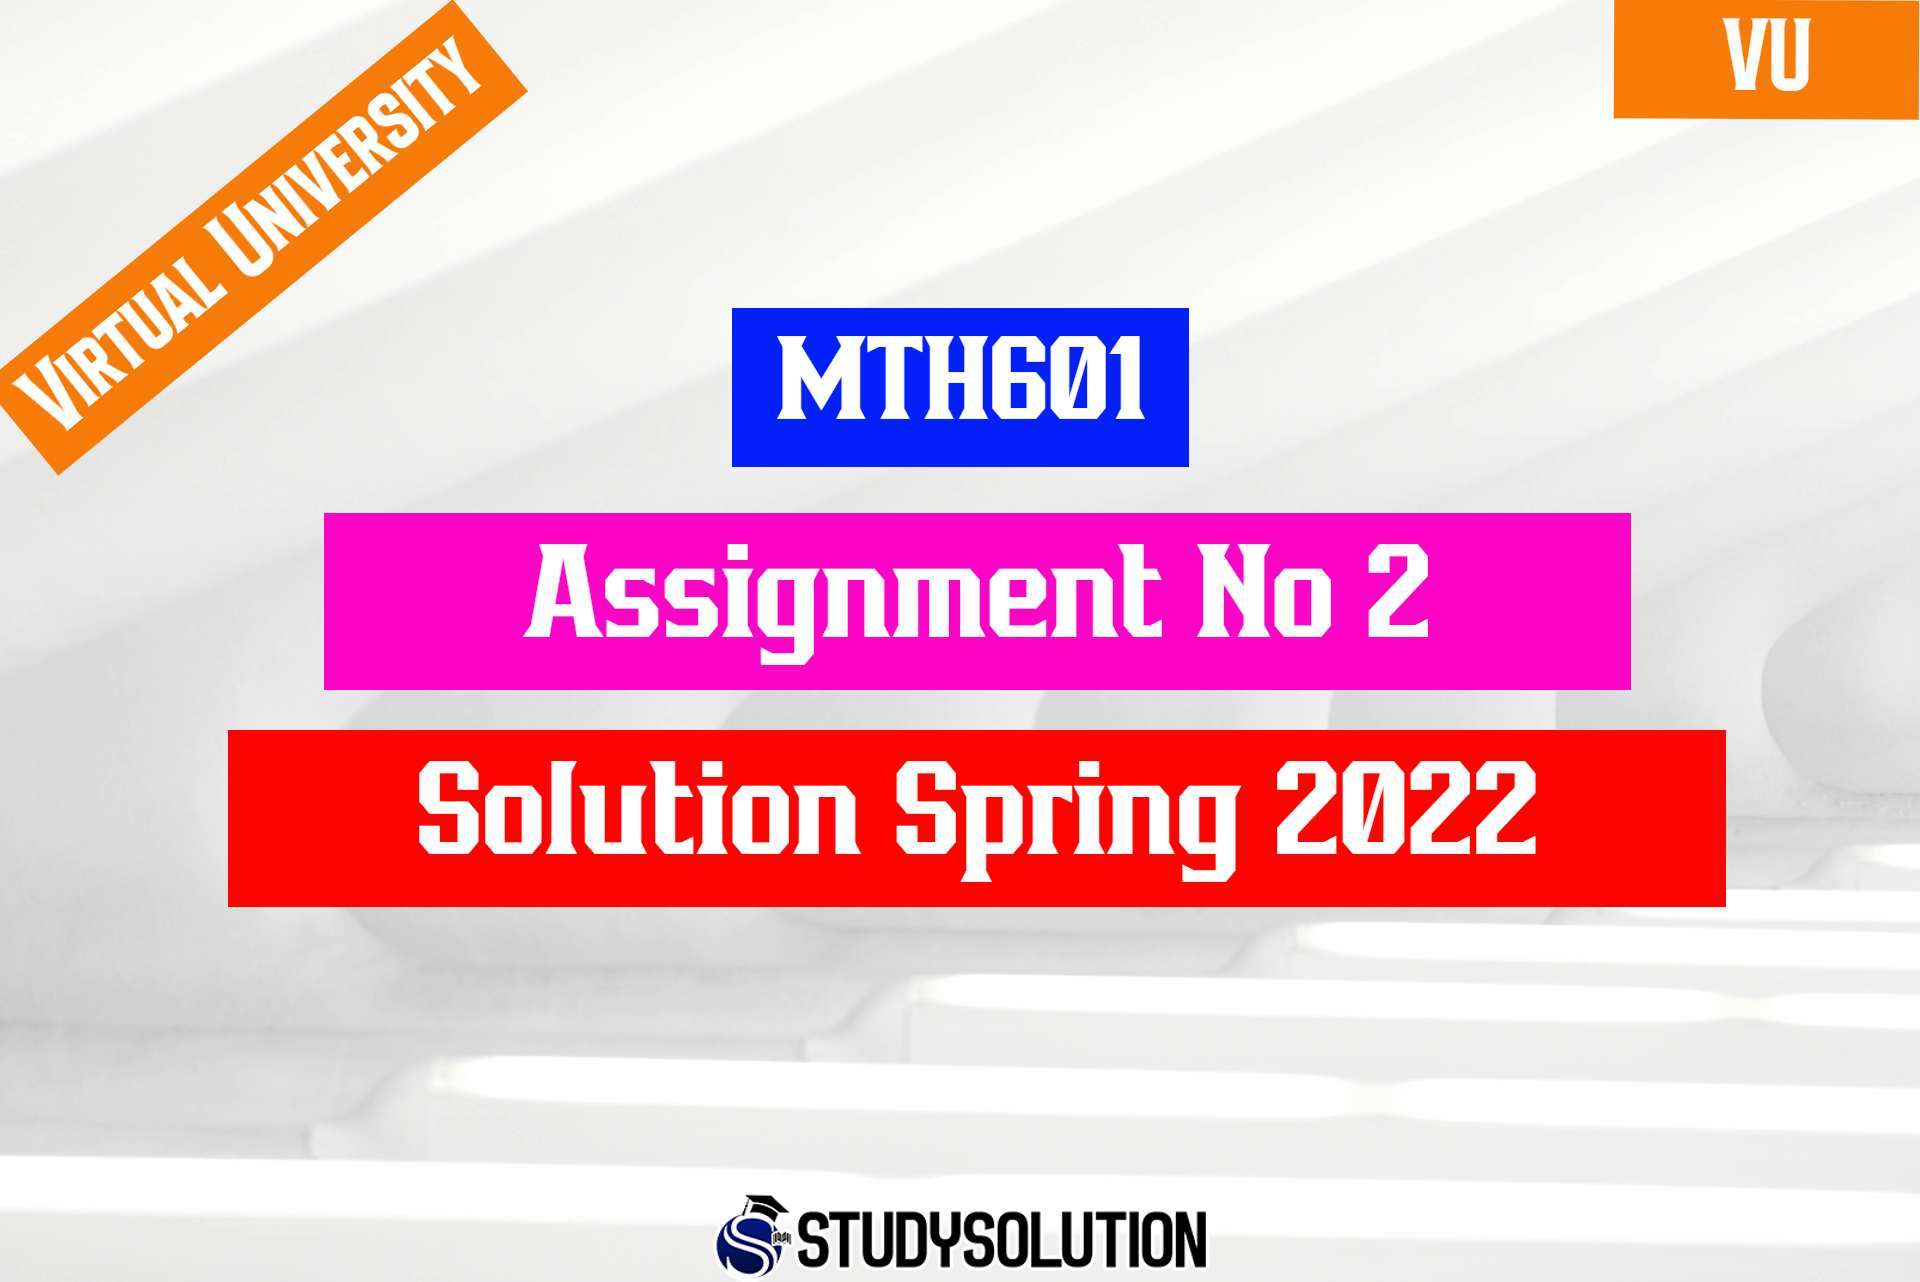 MTH601 Assignment No 2 Solution Spring 2022